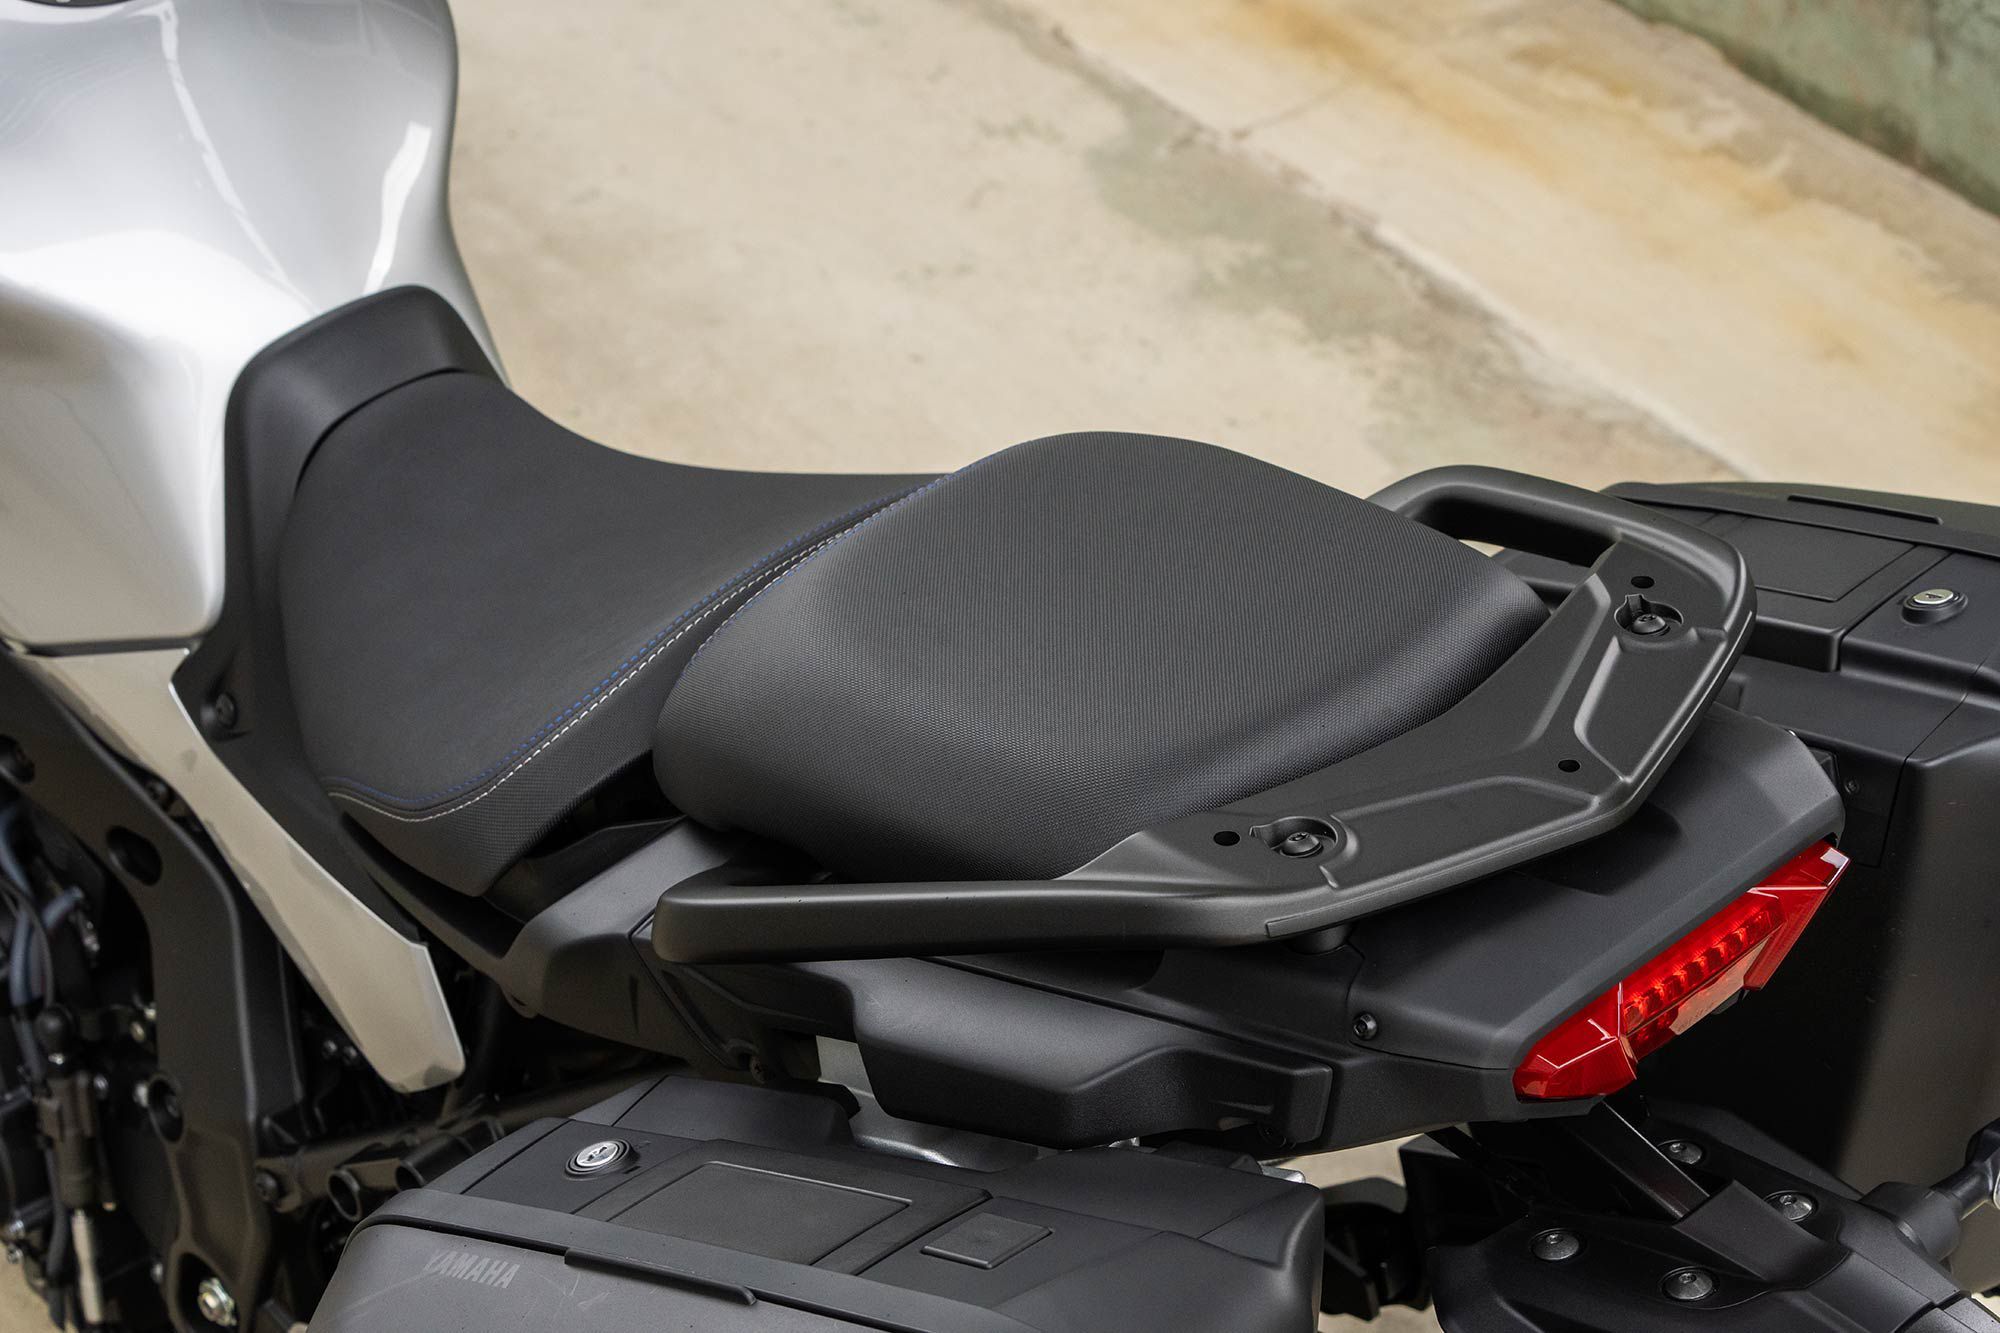 The Tracer 9 GT offers comfortable seats for rider and passenger. We liked riding with the rider’s seat in the lower of two positions.